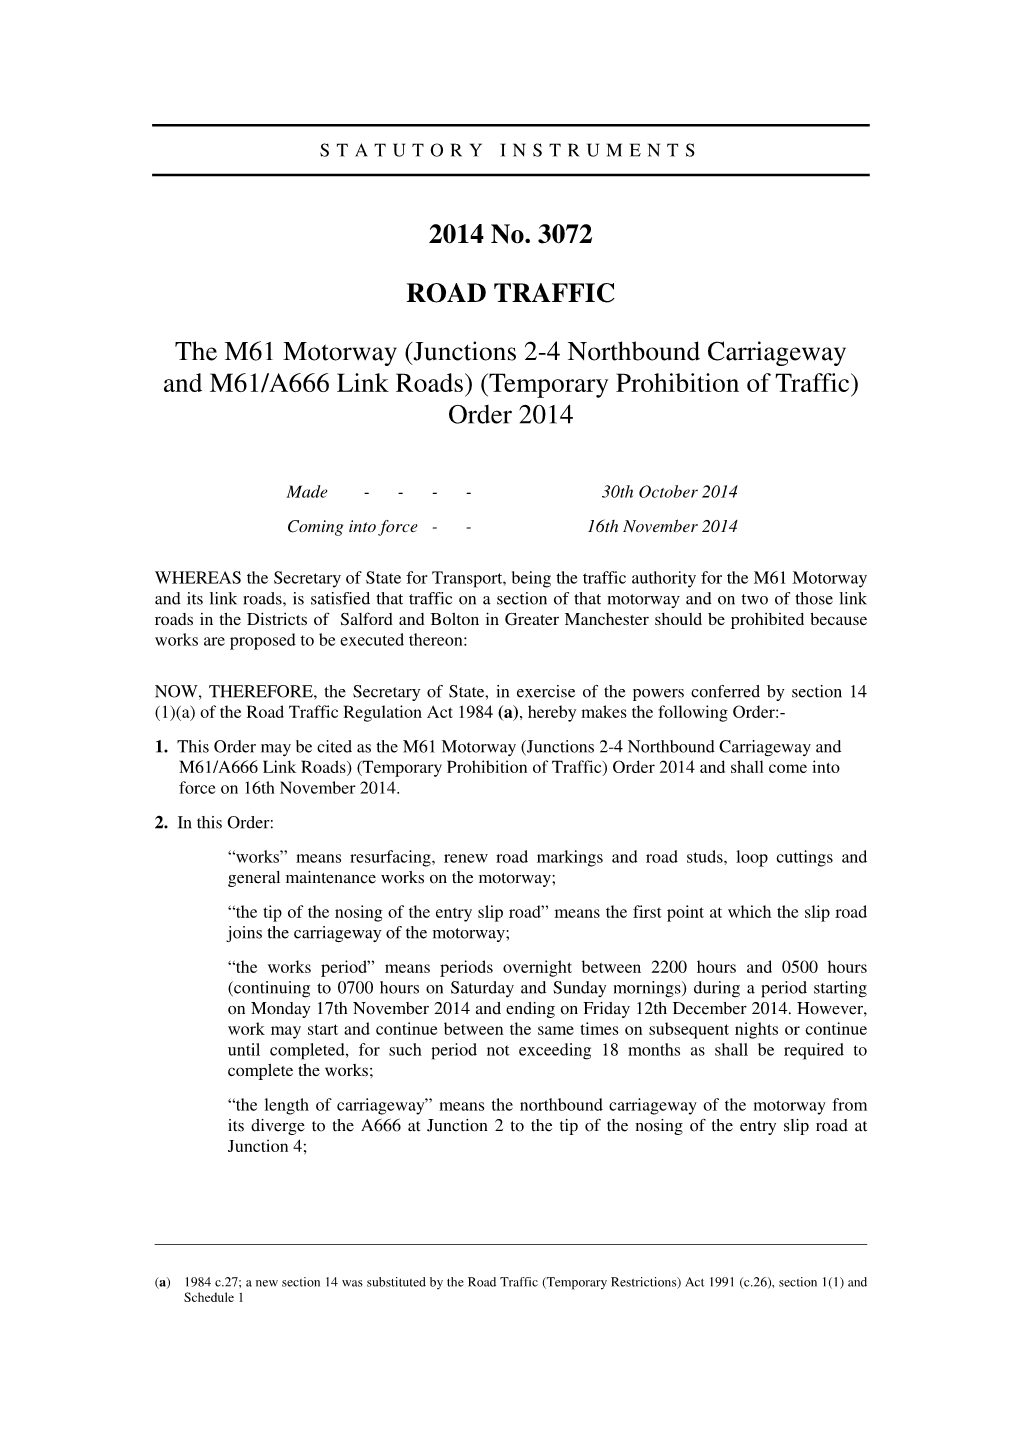 The M61 Motorway (Junctions 2-4 Northbound Carriageway and M61/A666 Link Roads) (Temporary Prohibition of Traffic) Order 2014